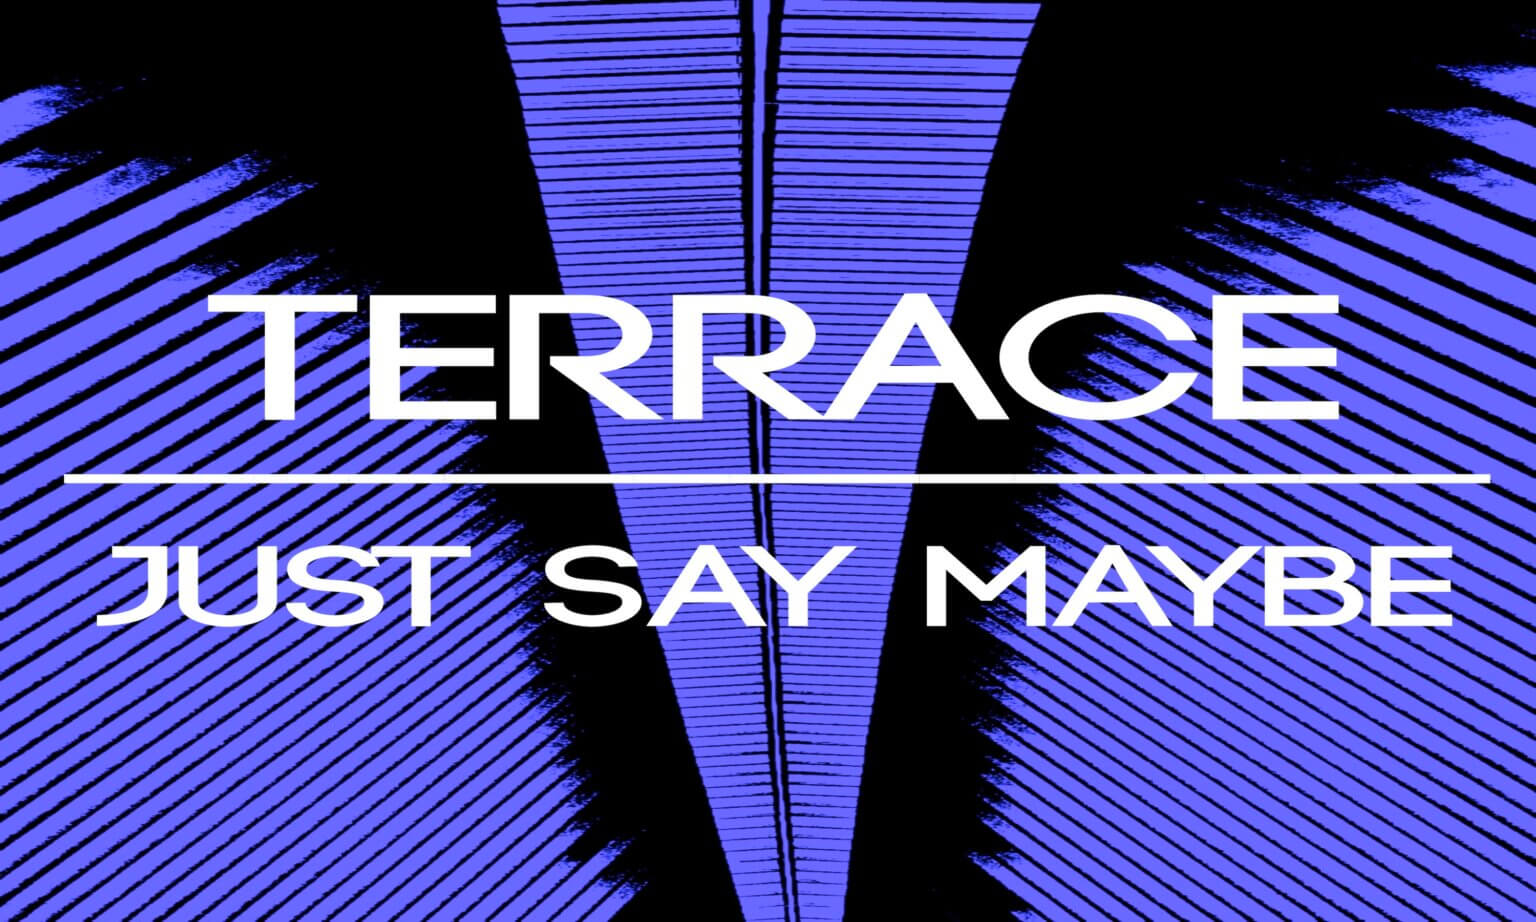 "Crazy Times" by Terrace is Northern Transmissions Song of the Day. The track is off their album Just Say Maybe, out now via TechnFunk